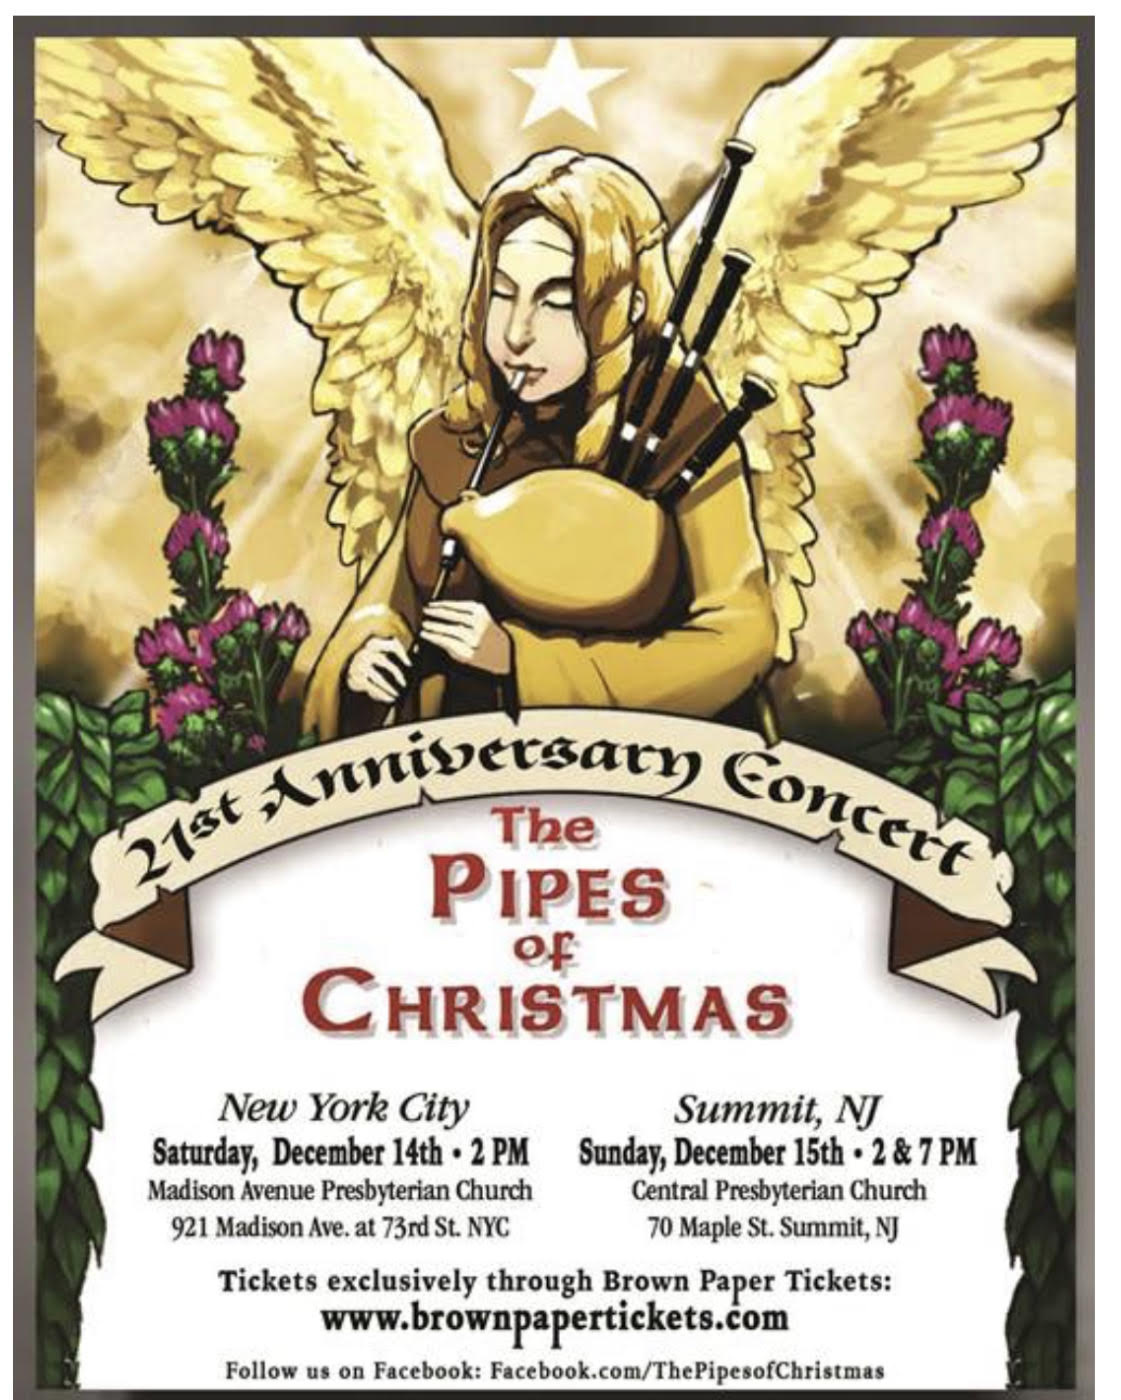 The Pipes of Christmas returns for 21st season in NYC and NJ.